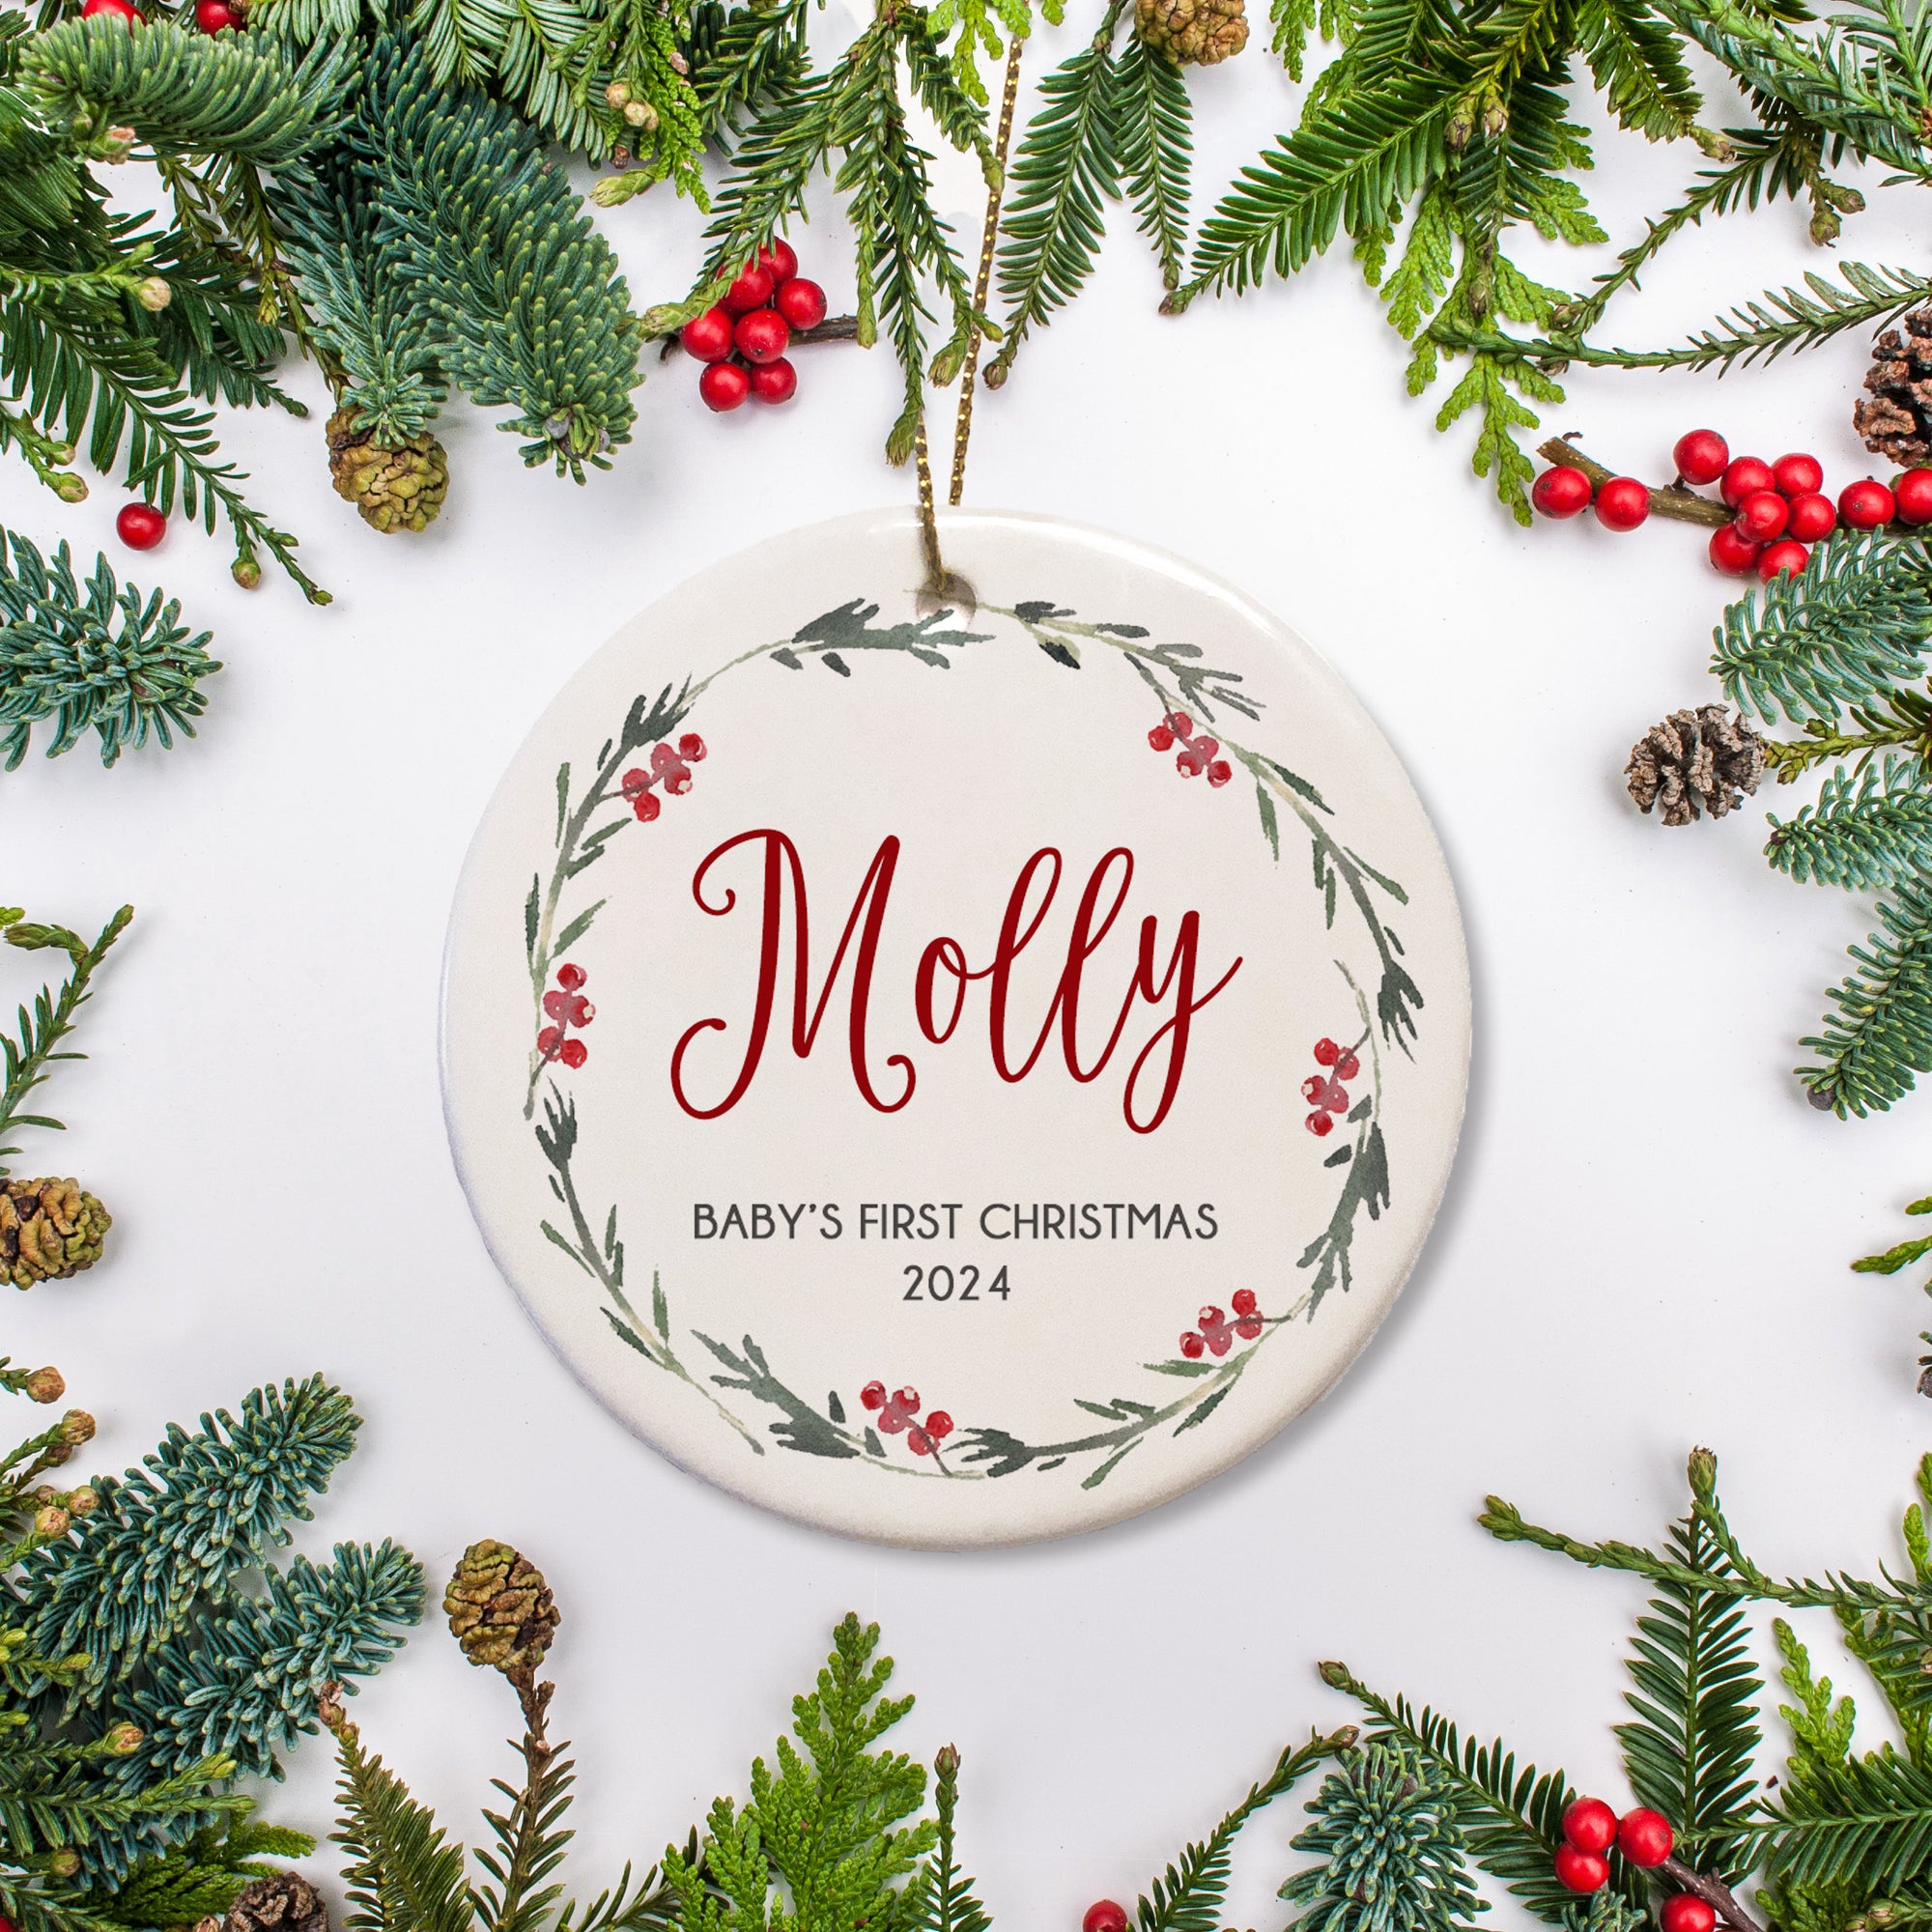 Baby's First Christmas Ornament, Personalized, Name in script in a sweet holly wreath. Good for girls, boys or gender neutral, Ceramic with free gift box